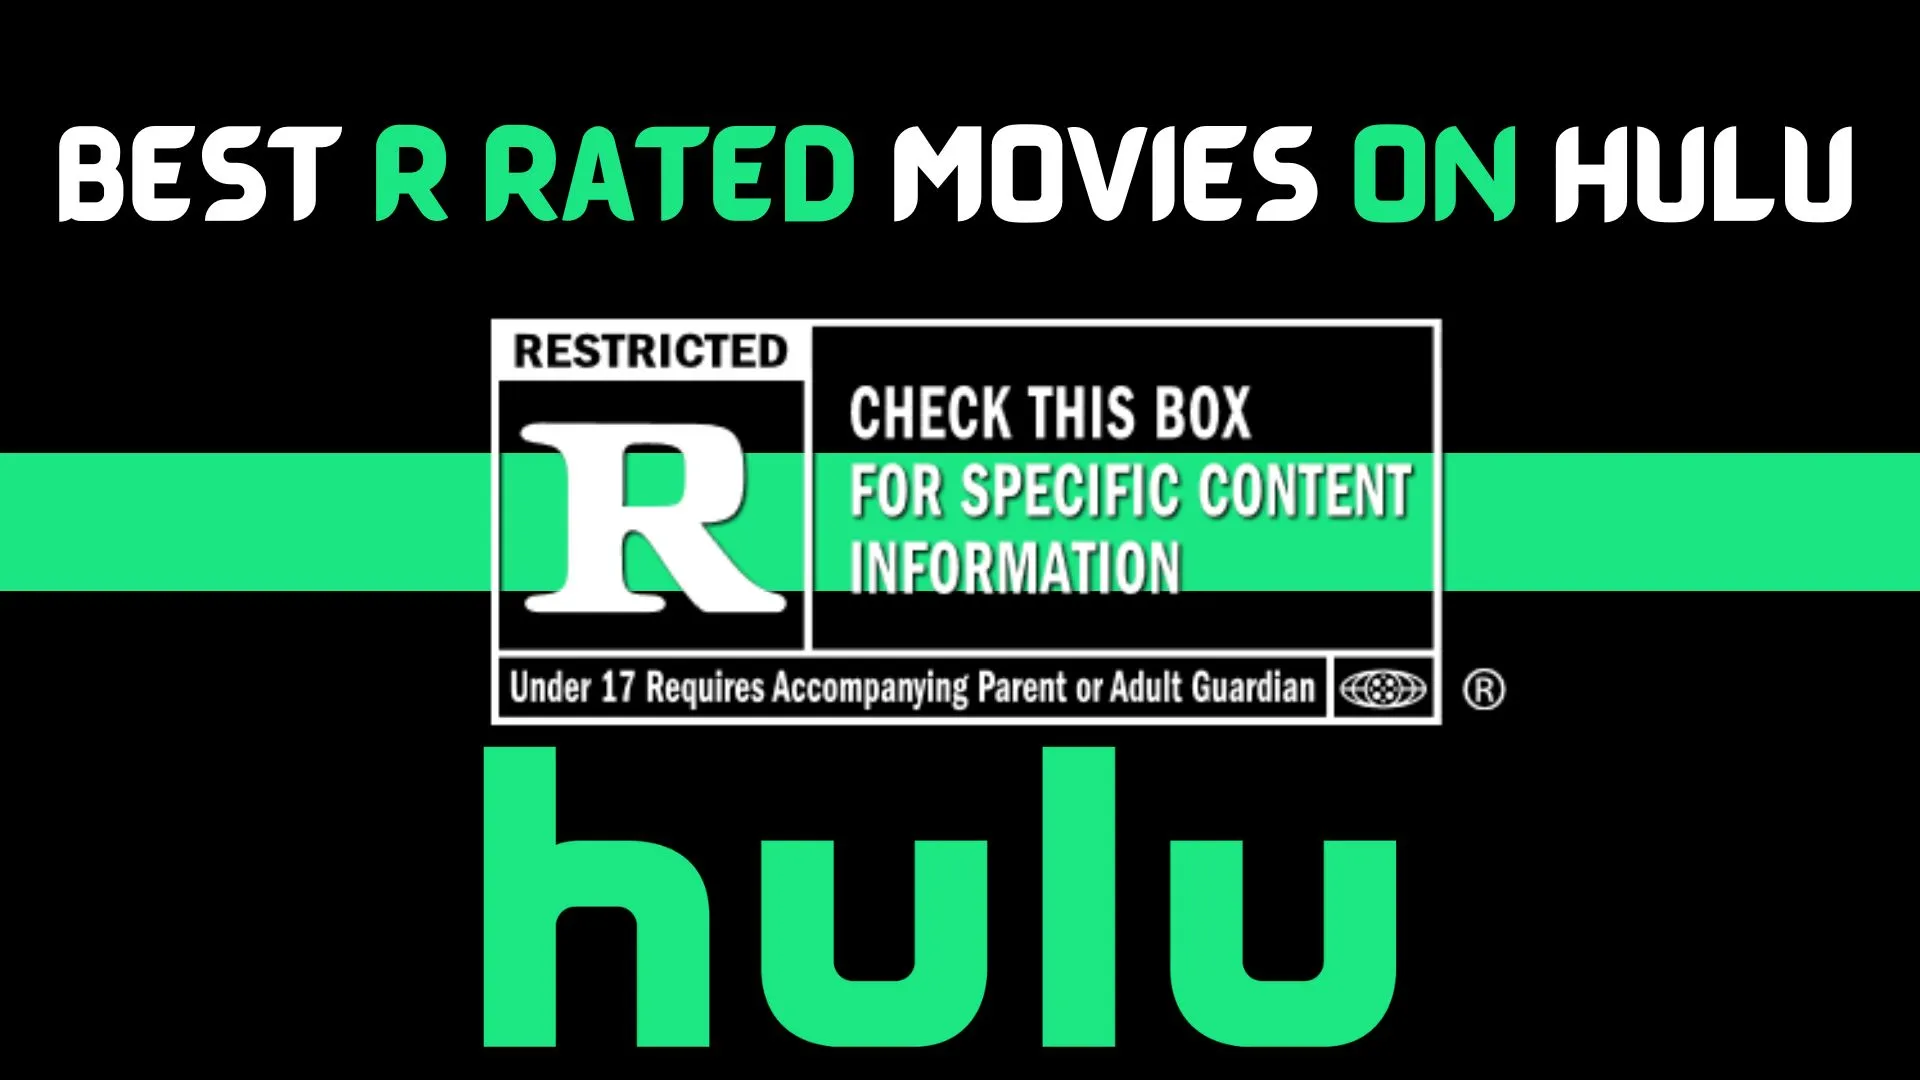 Best R Rated Movies on Hulu